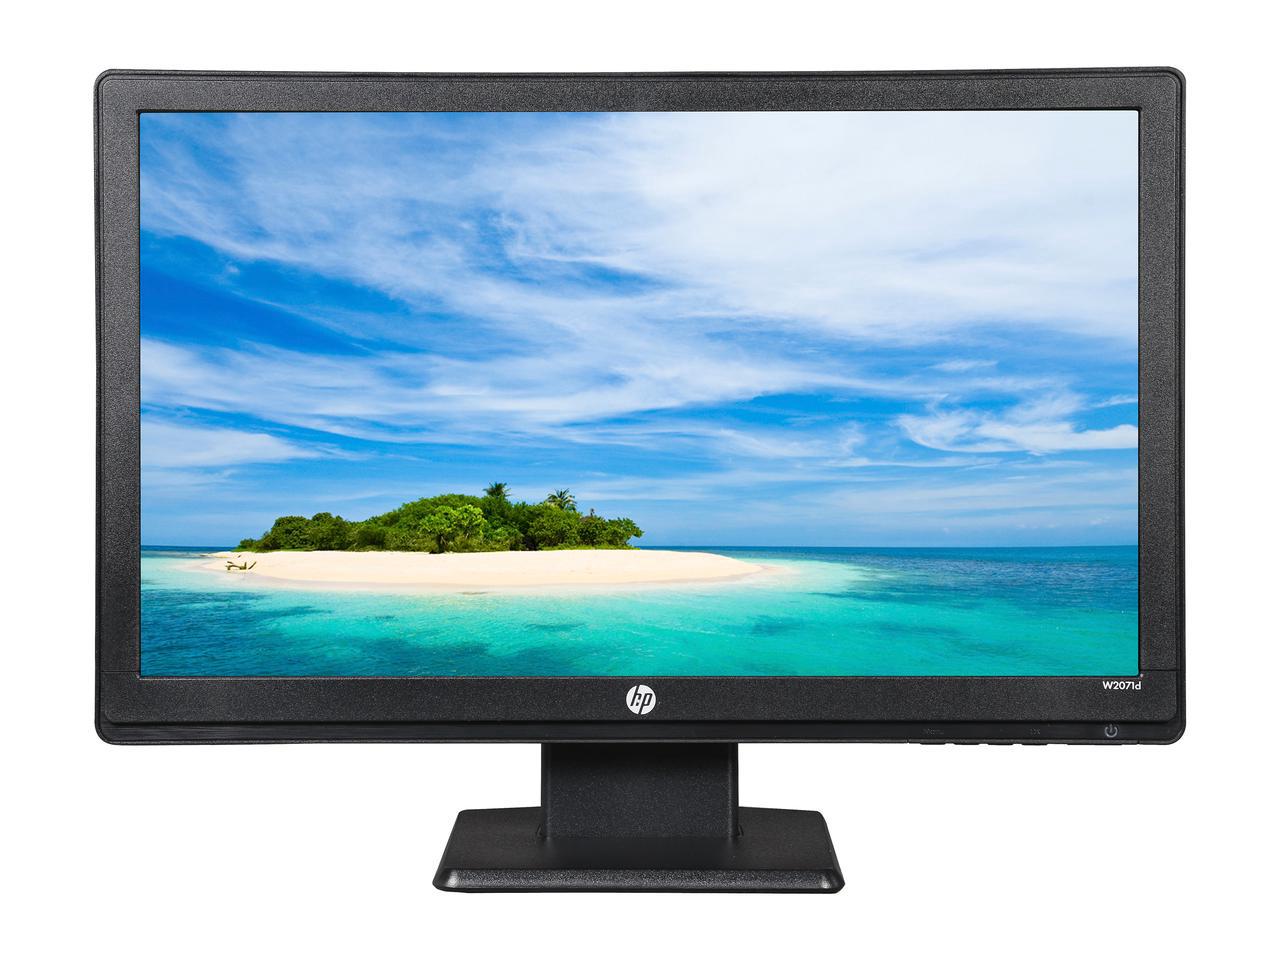 HP W2071d 20-inch LED Backlit LCD Monitor